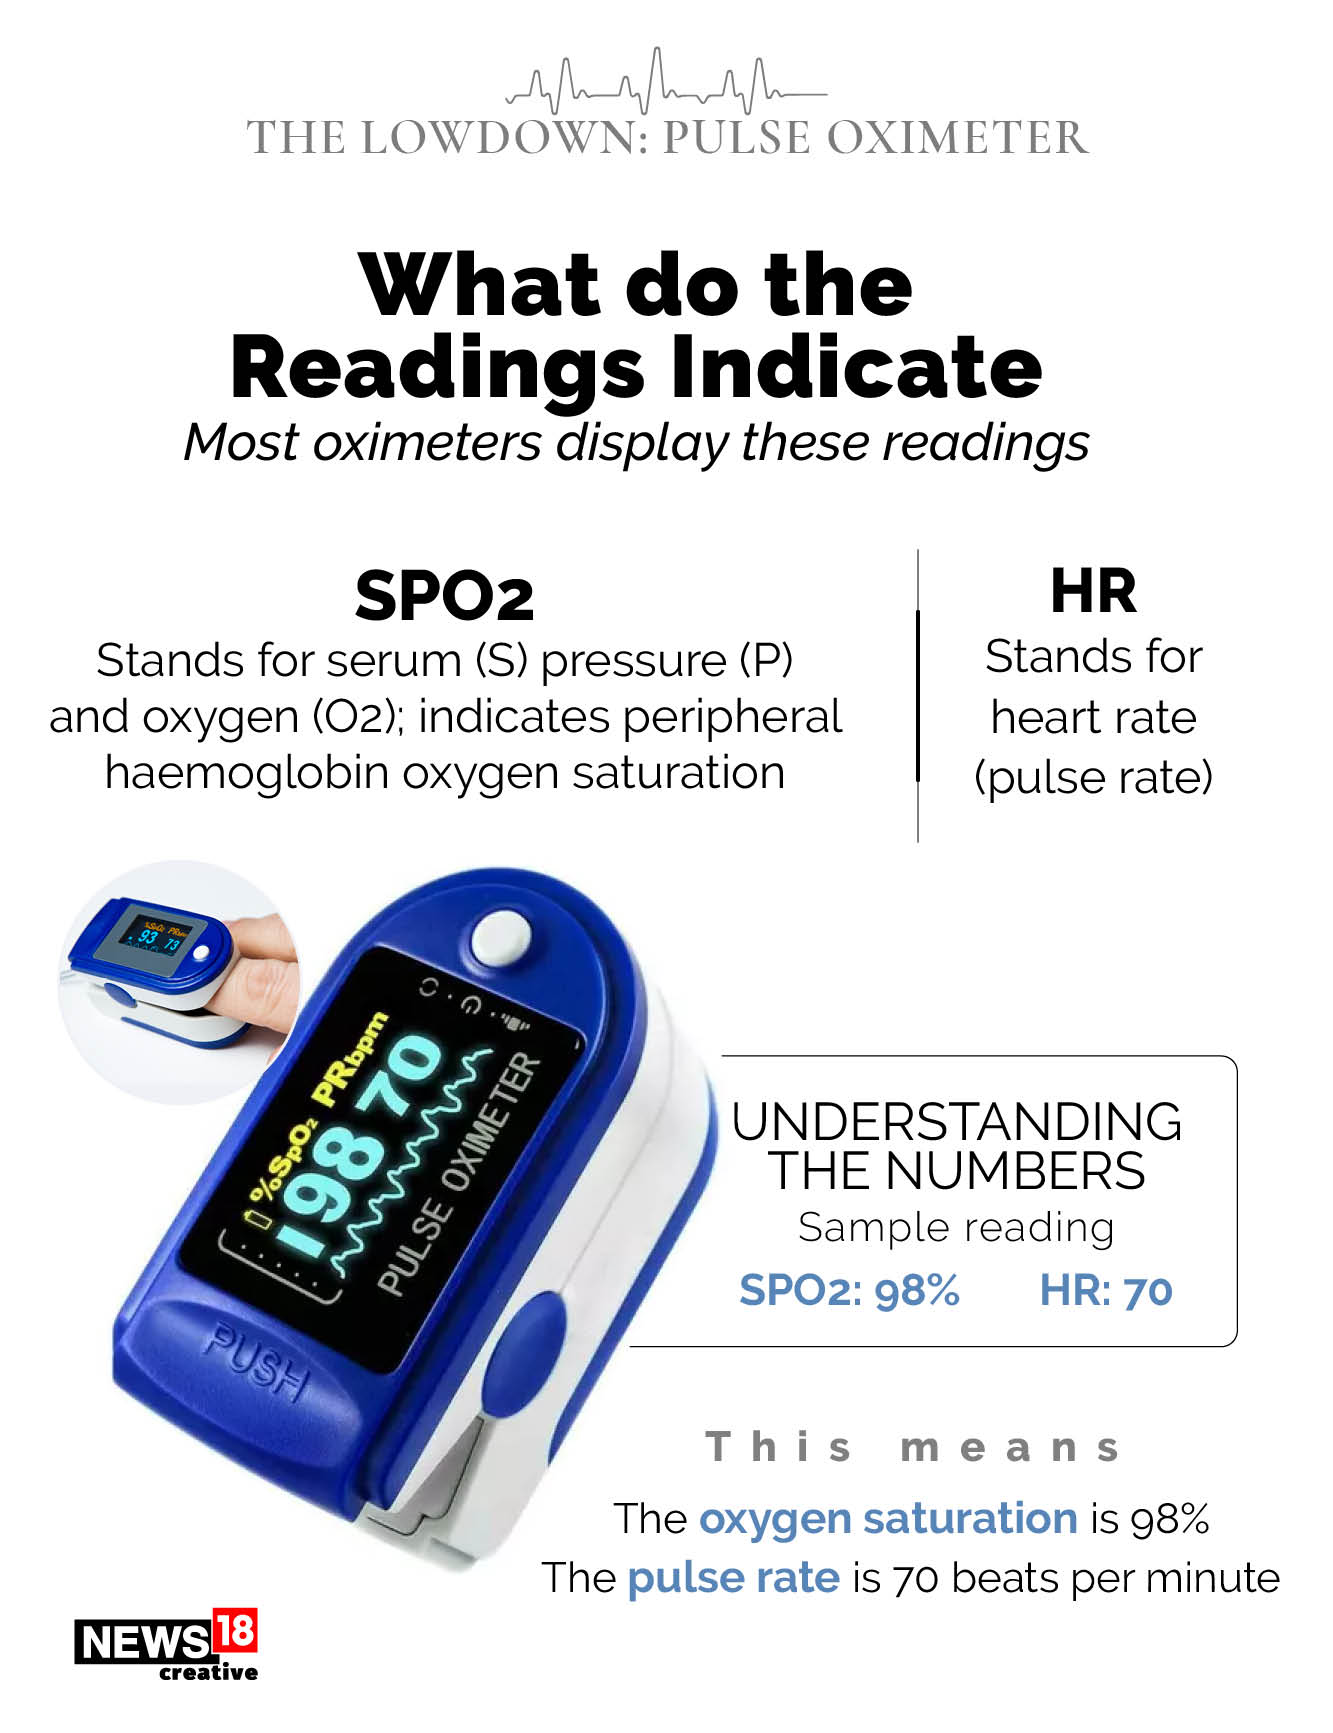 Explained: How does an oximeter work?